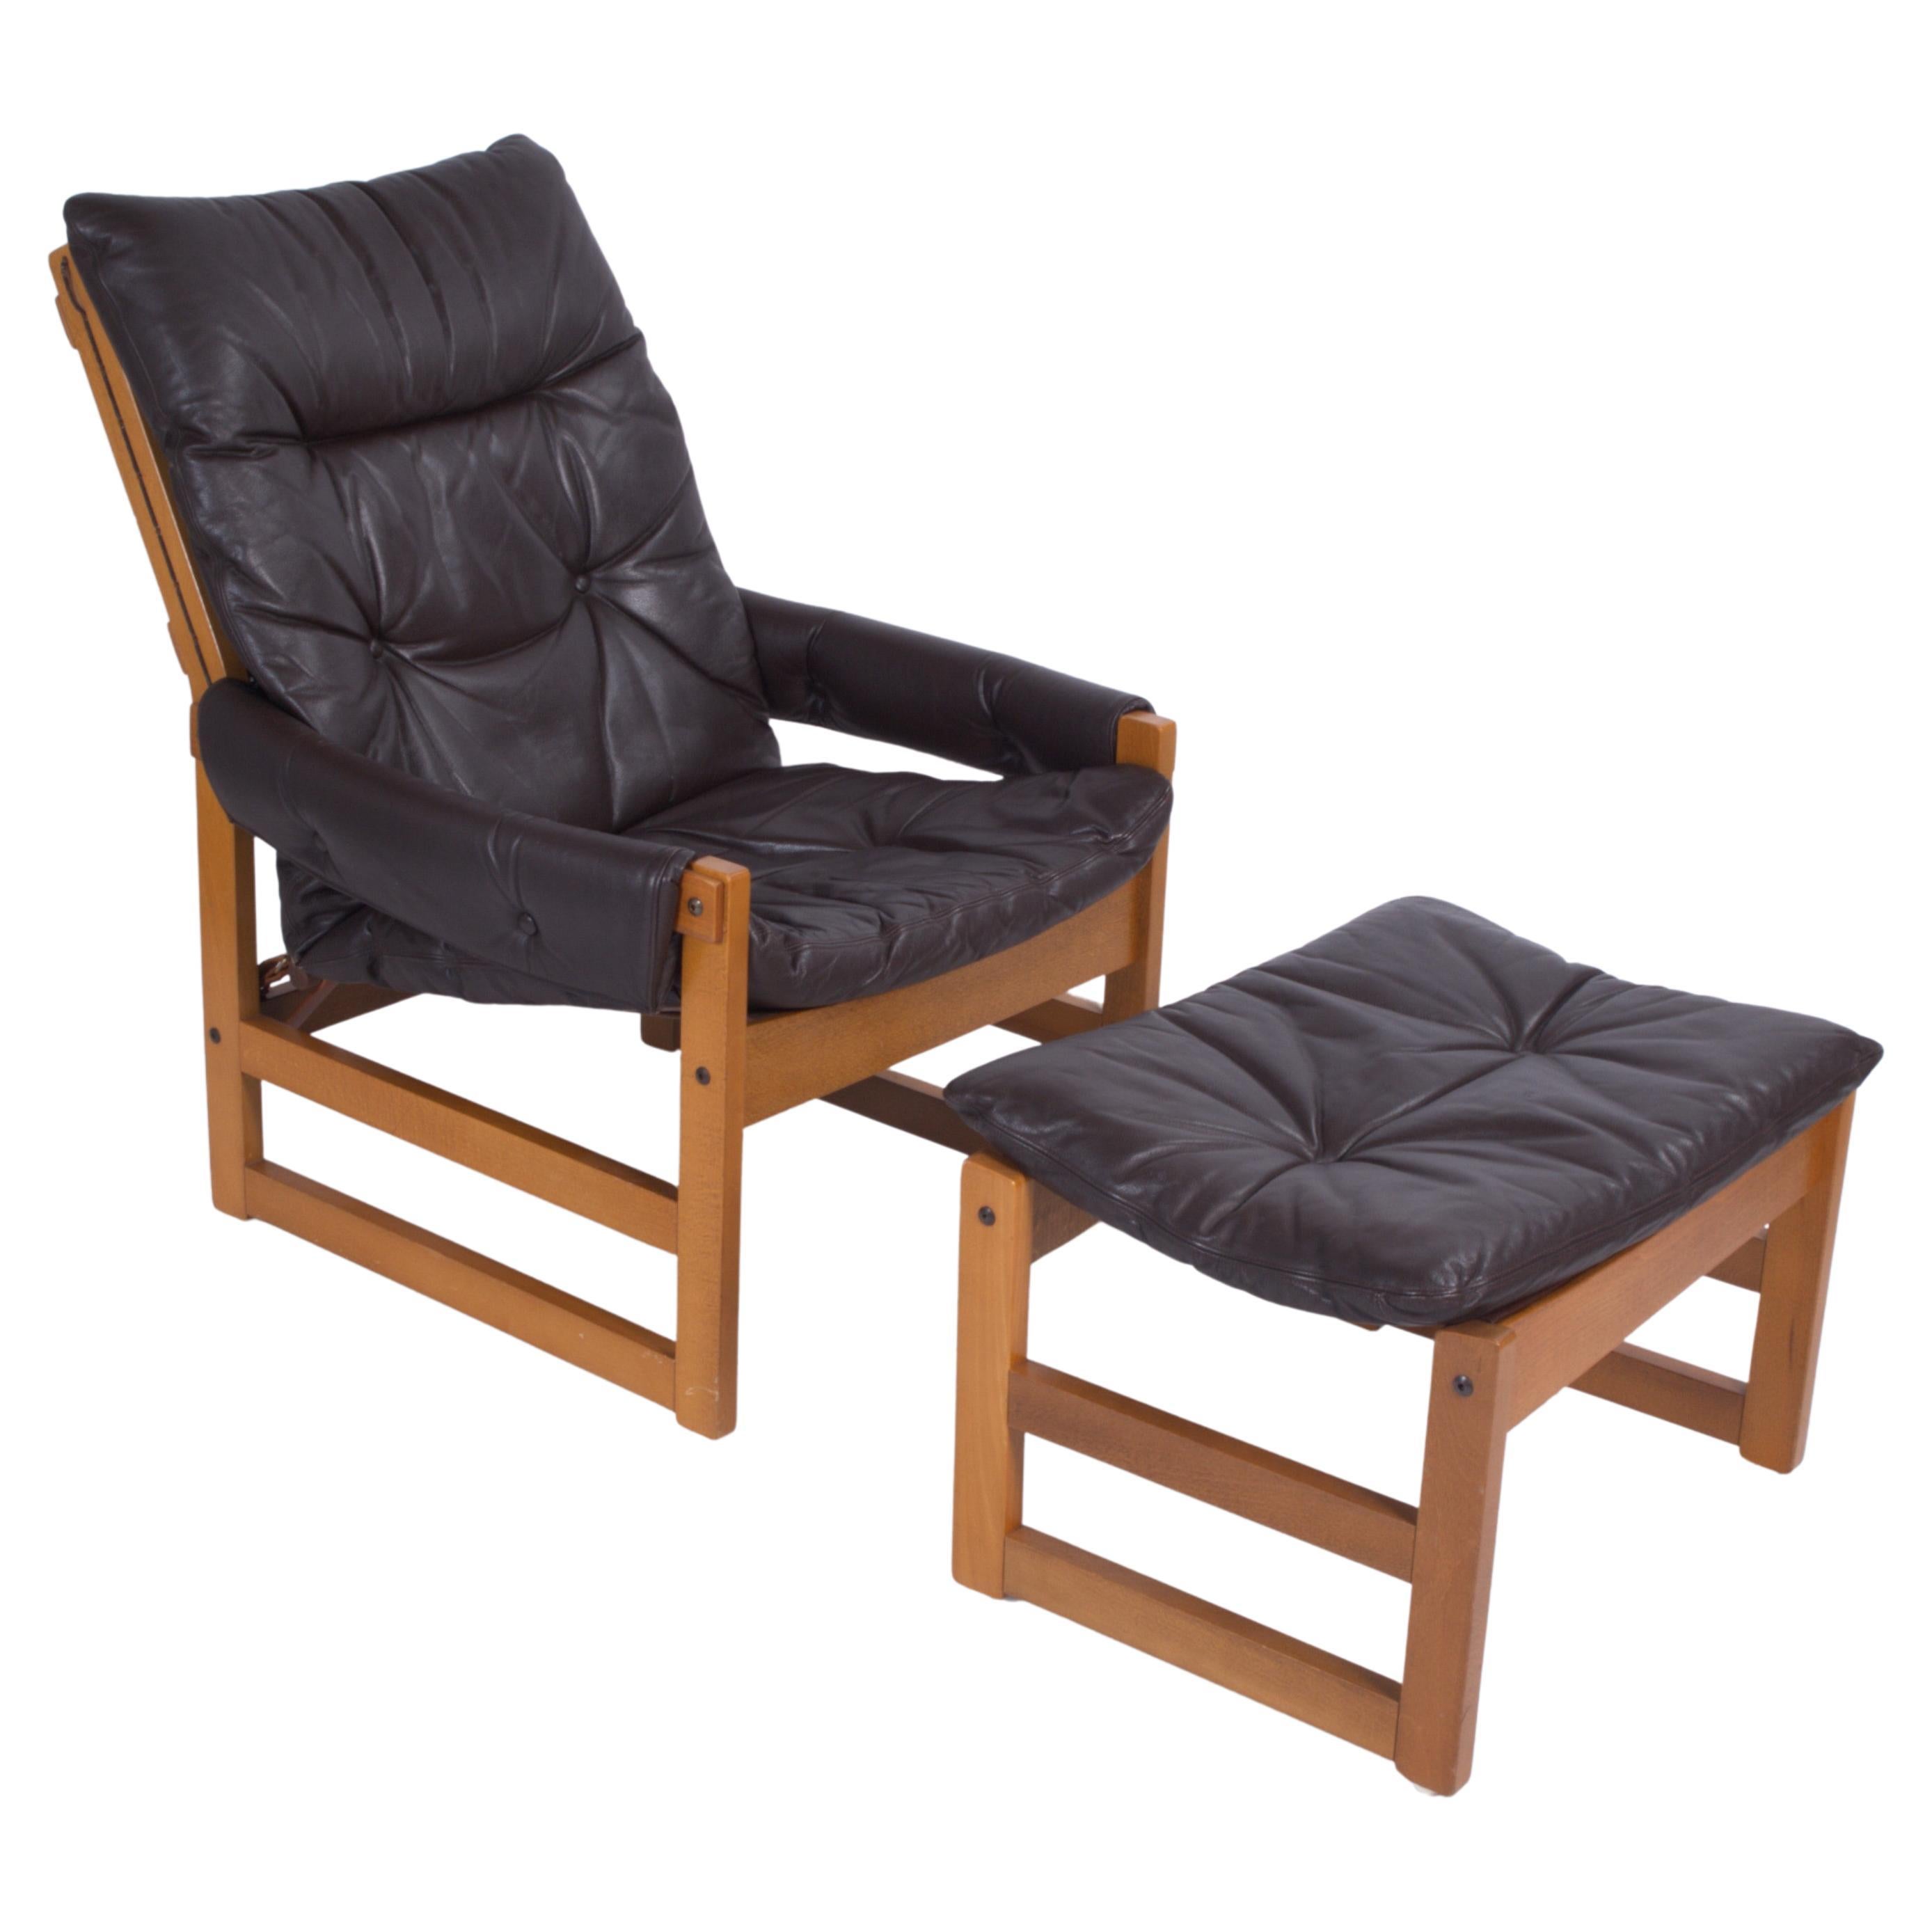 Mid-Century Norwegian Leather Chair + Ottoman by Jan Eckhardt, 1960s For Sale